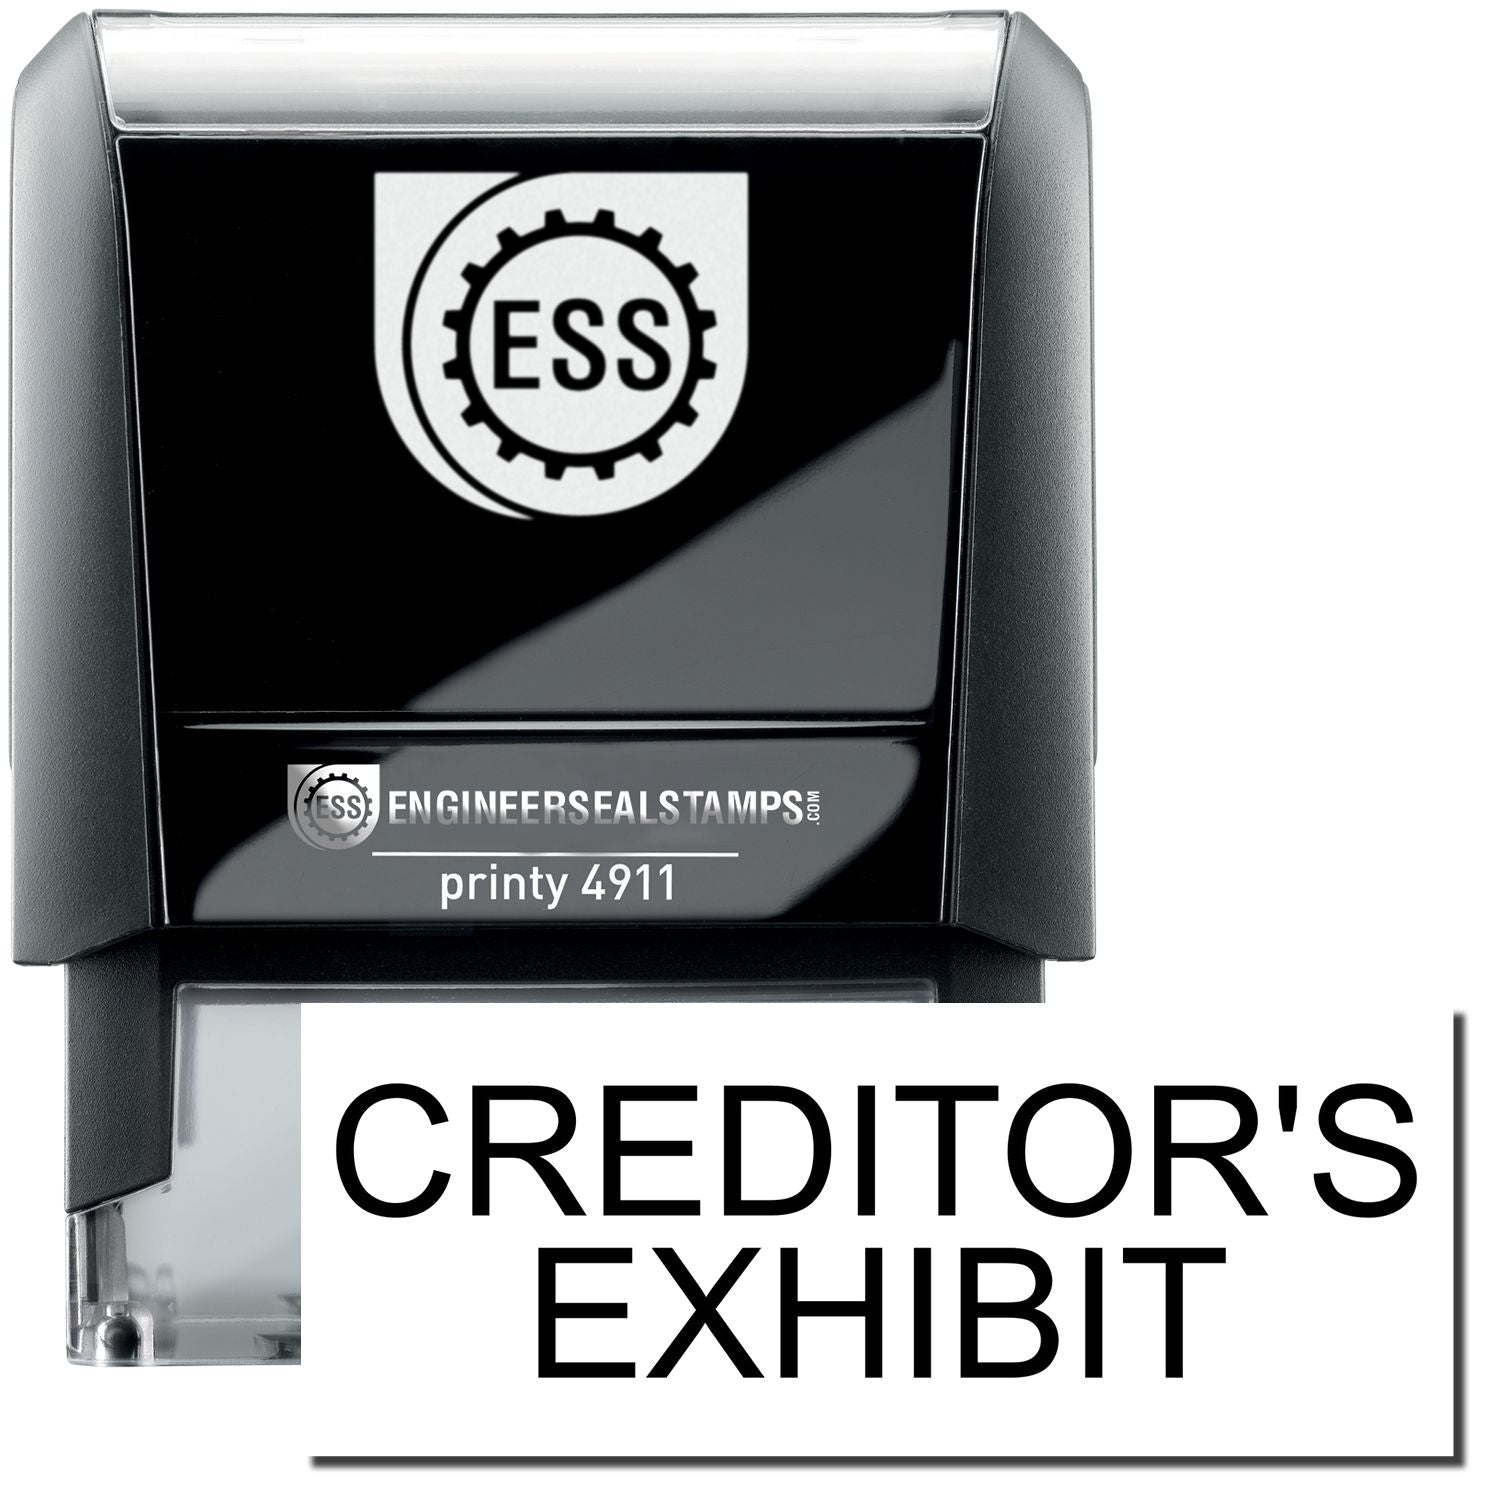 A self-inking stamp with a stamped image showing how the text "CREDITOR'S EXHIBIT" is displayed after stamping.